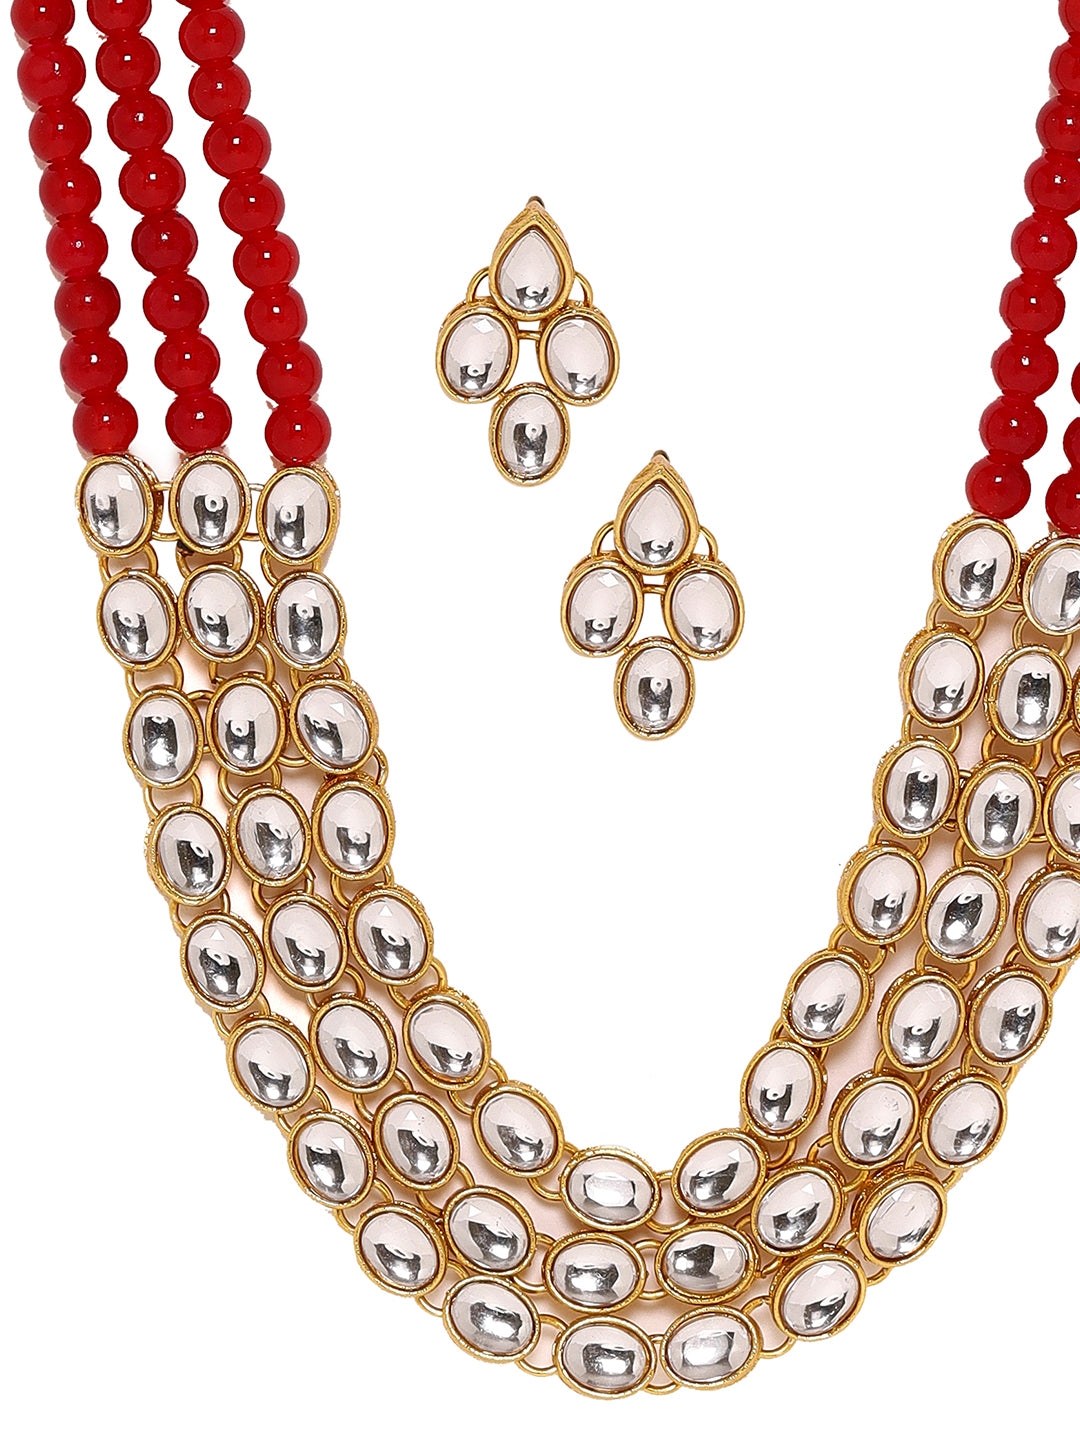 Priyaasi A Kundan Jewellery Set Adorned with Rubies and Exquisite Earrings